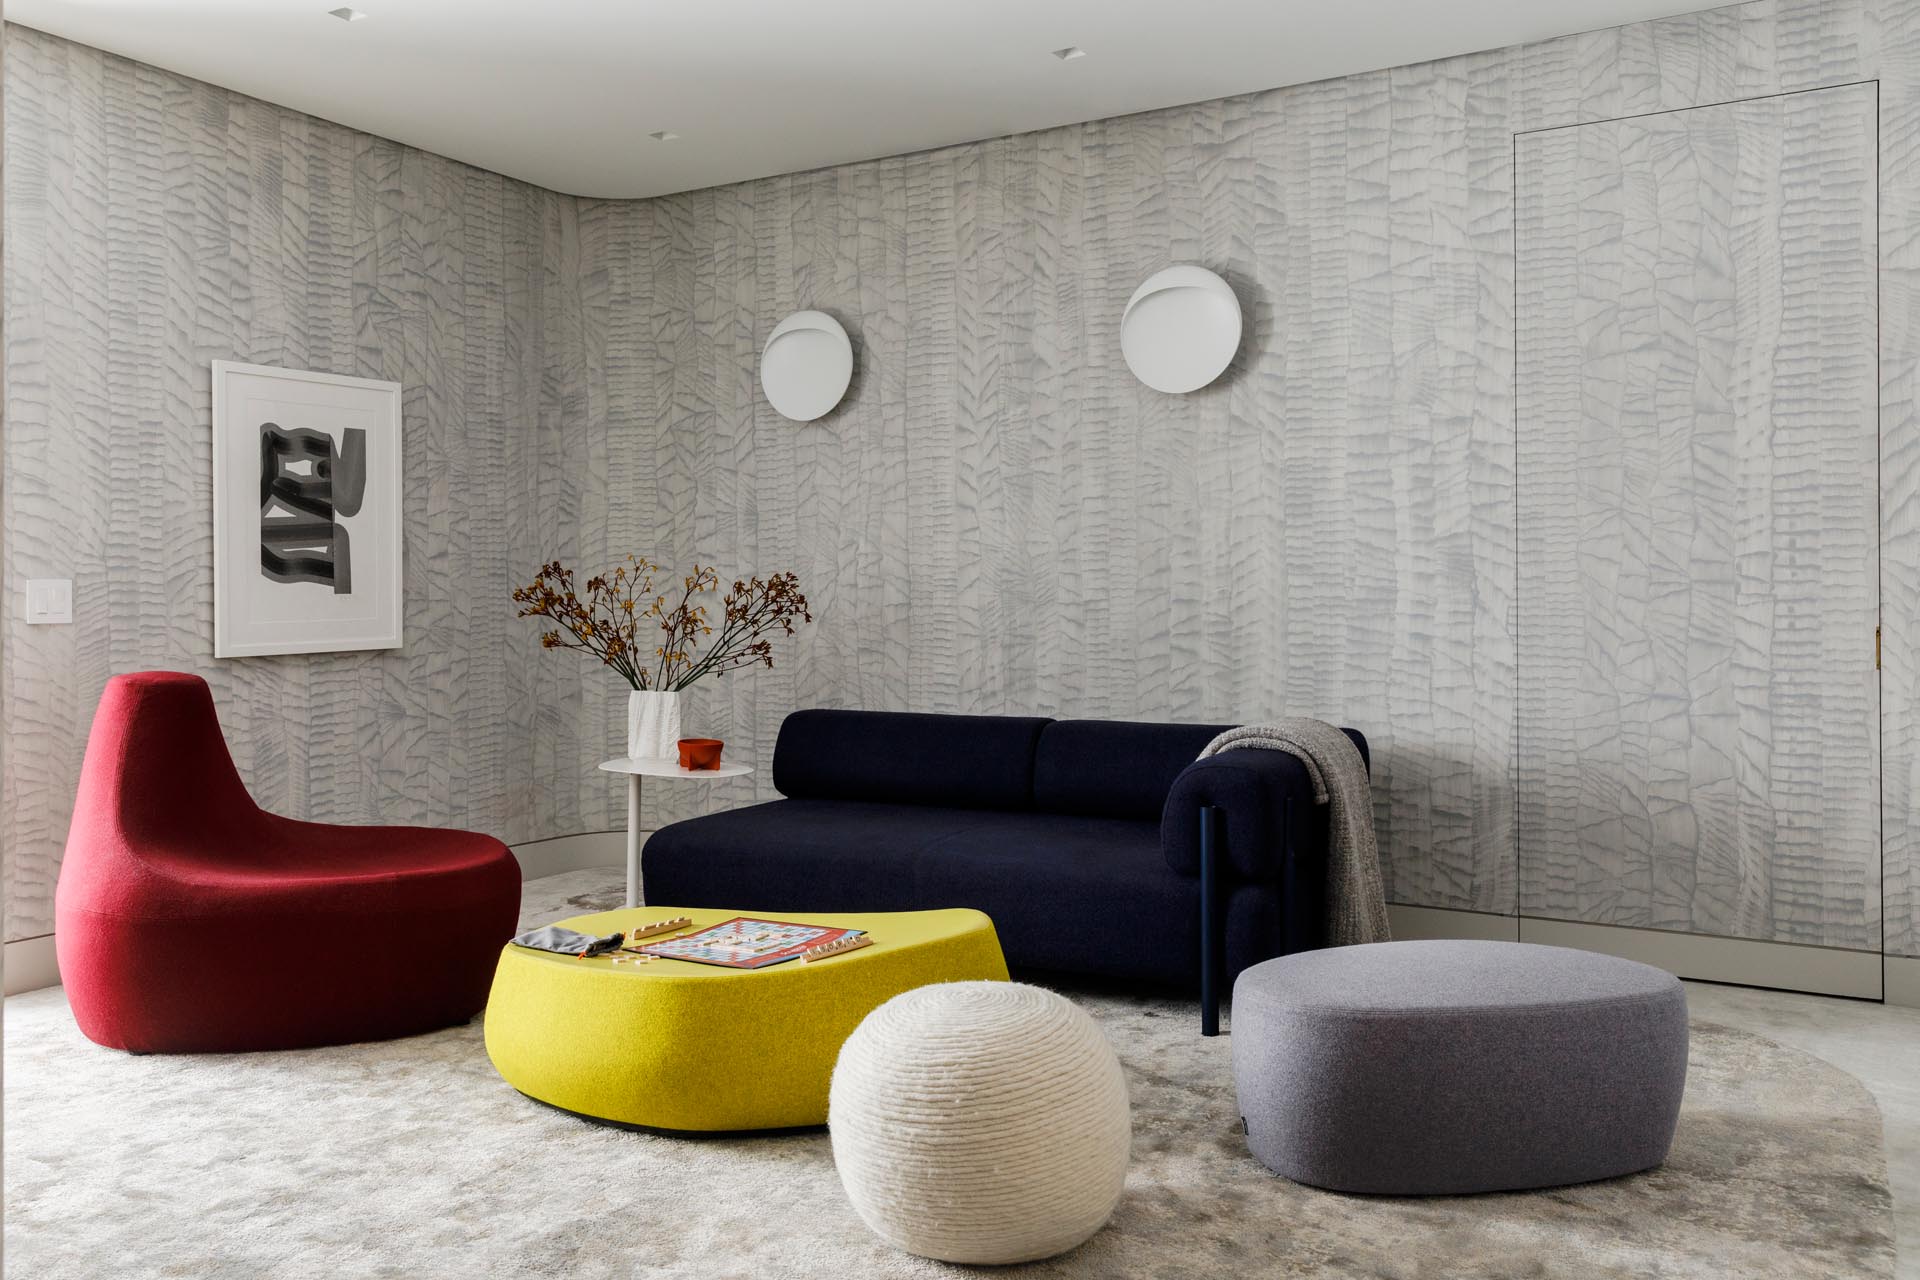 In this modern playroom, there's a hand-printed wallcovering and graphic carpet MKCA created with Stark Carpet. Complementing the walls are a range of vibrant and modern furnishings from Moroso and Hem.